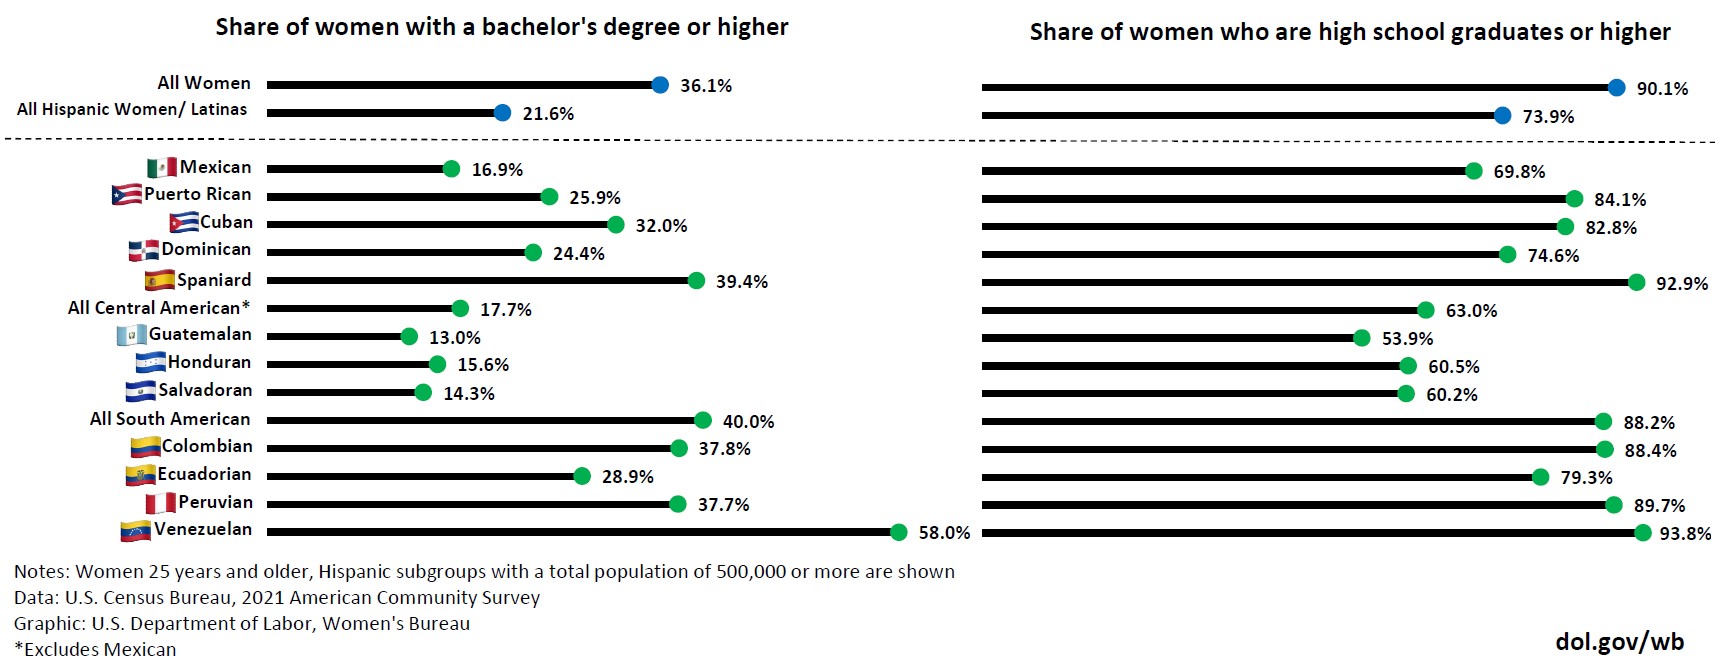 Share of women (25+) with a bachelor’s degree or higher and share of women (25+) who are high school graduates or higher among Hispanic subpopulations. Only subpopulations with a total population of 500,000 or more are shown. This data is from the 2021 U.S. Census Bureau American Community Survey.